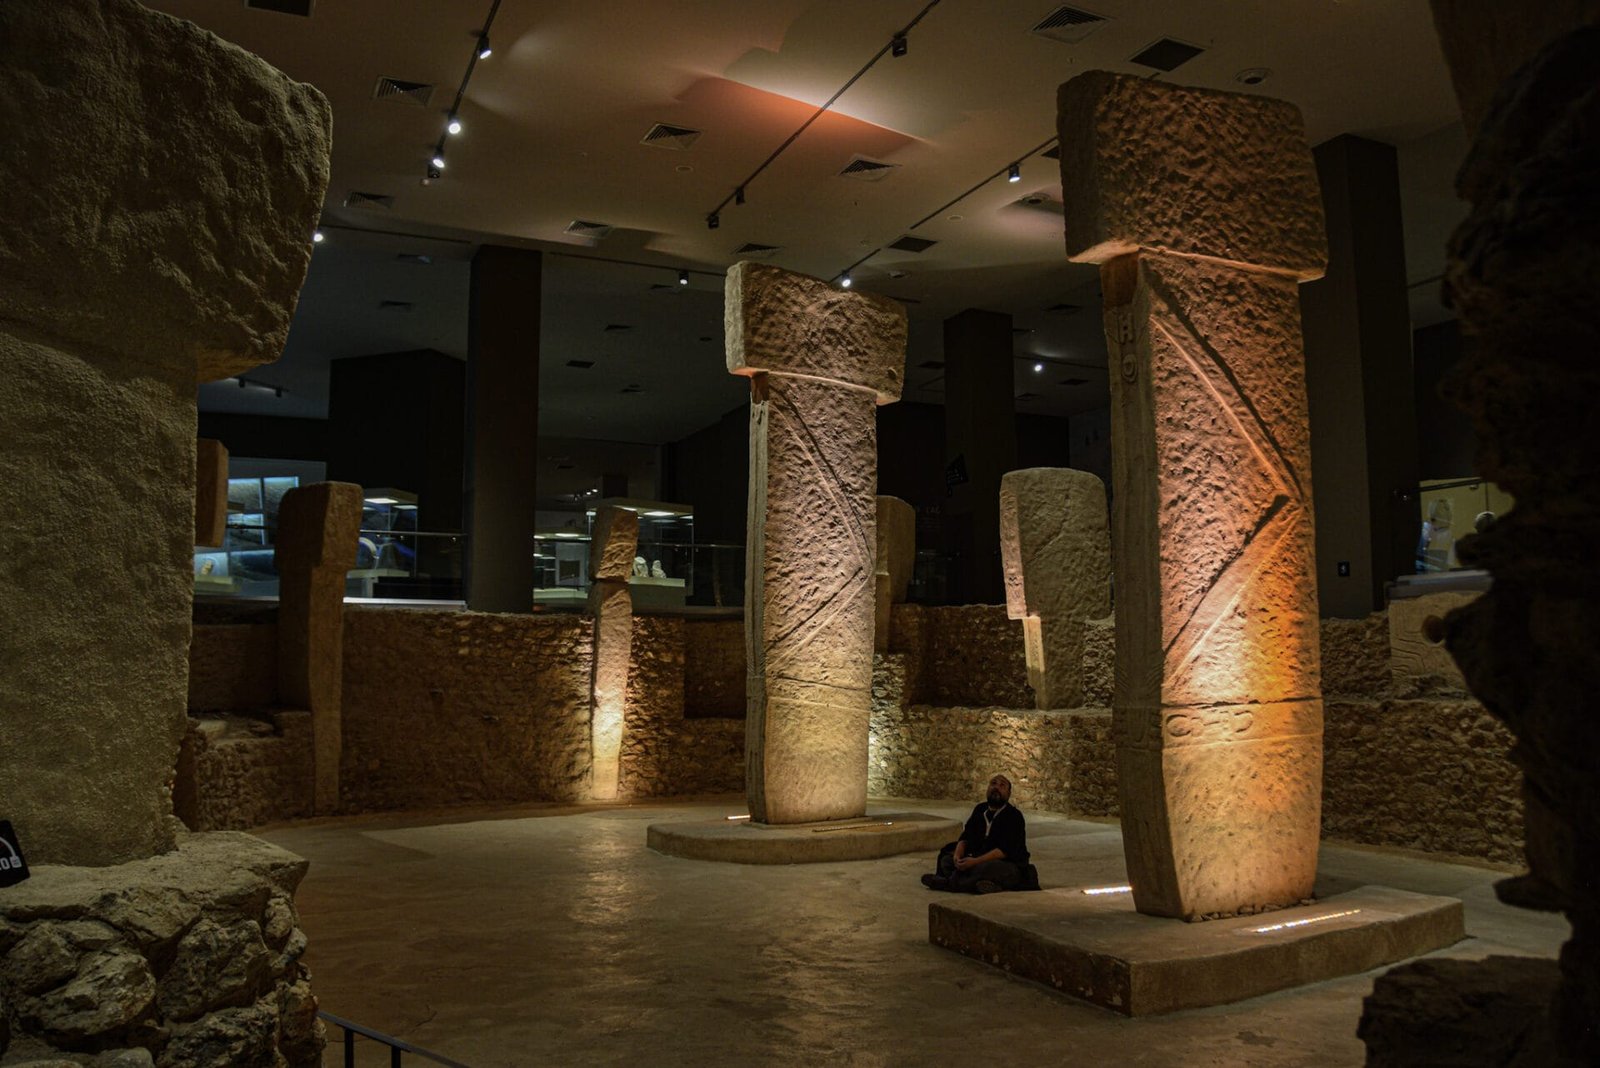 a man sits on the floor between the life-size replicas of two giant t-shaped pillars from Göbekli Tepe in the Sanliurfa Archaeological Museum